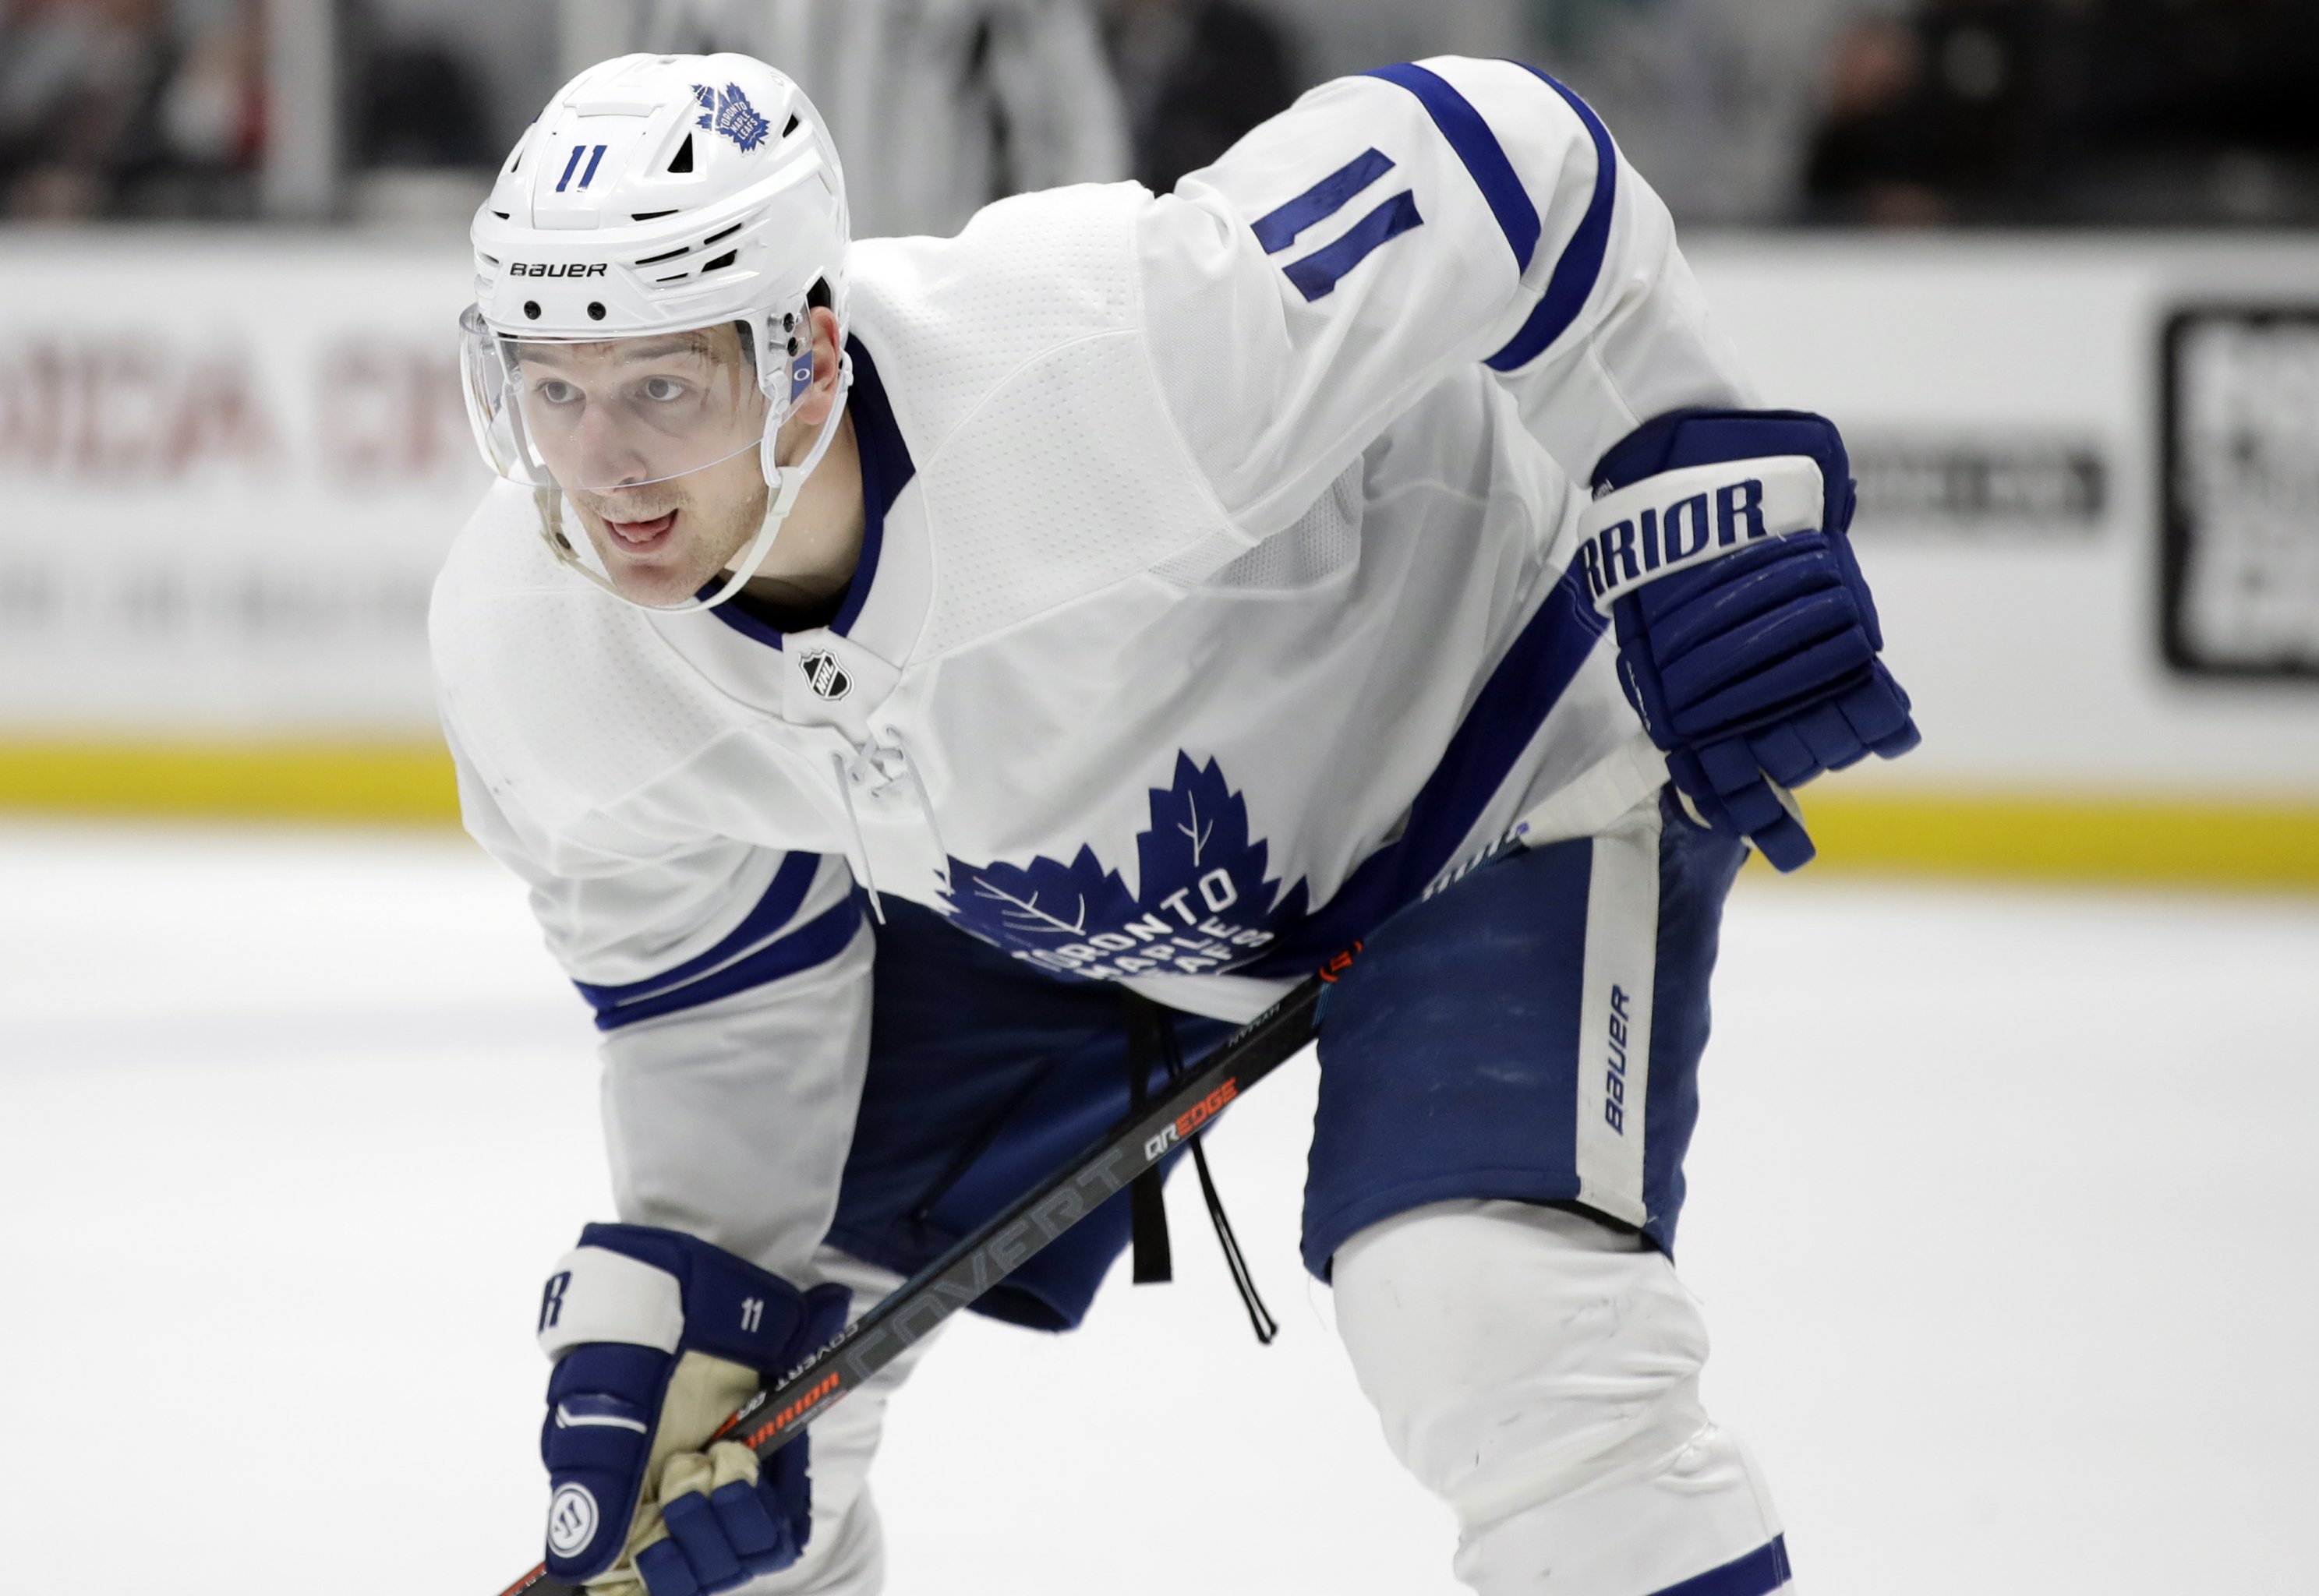 Top Free Agency Landing Spots For Maple Leafs Winger Zach Hyman Bleacher Report Latest News Videos And Highlights